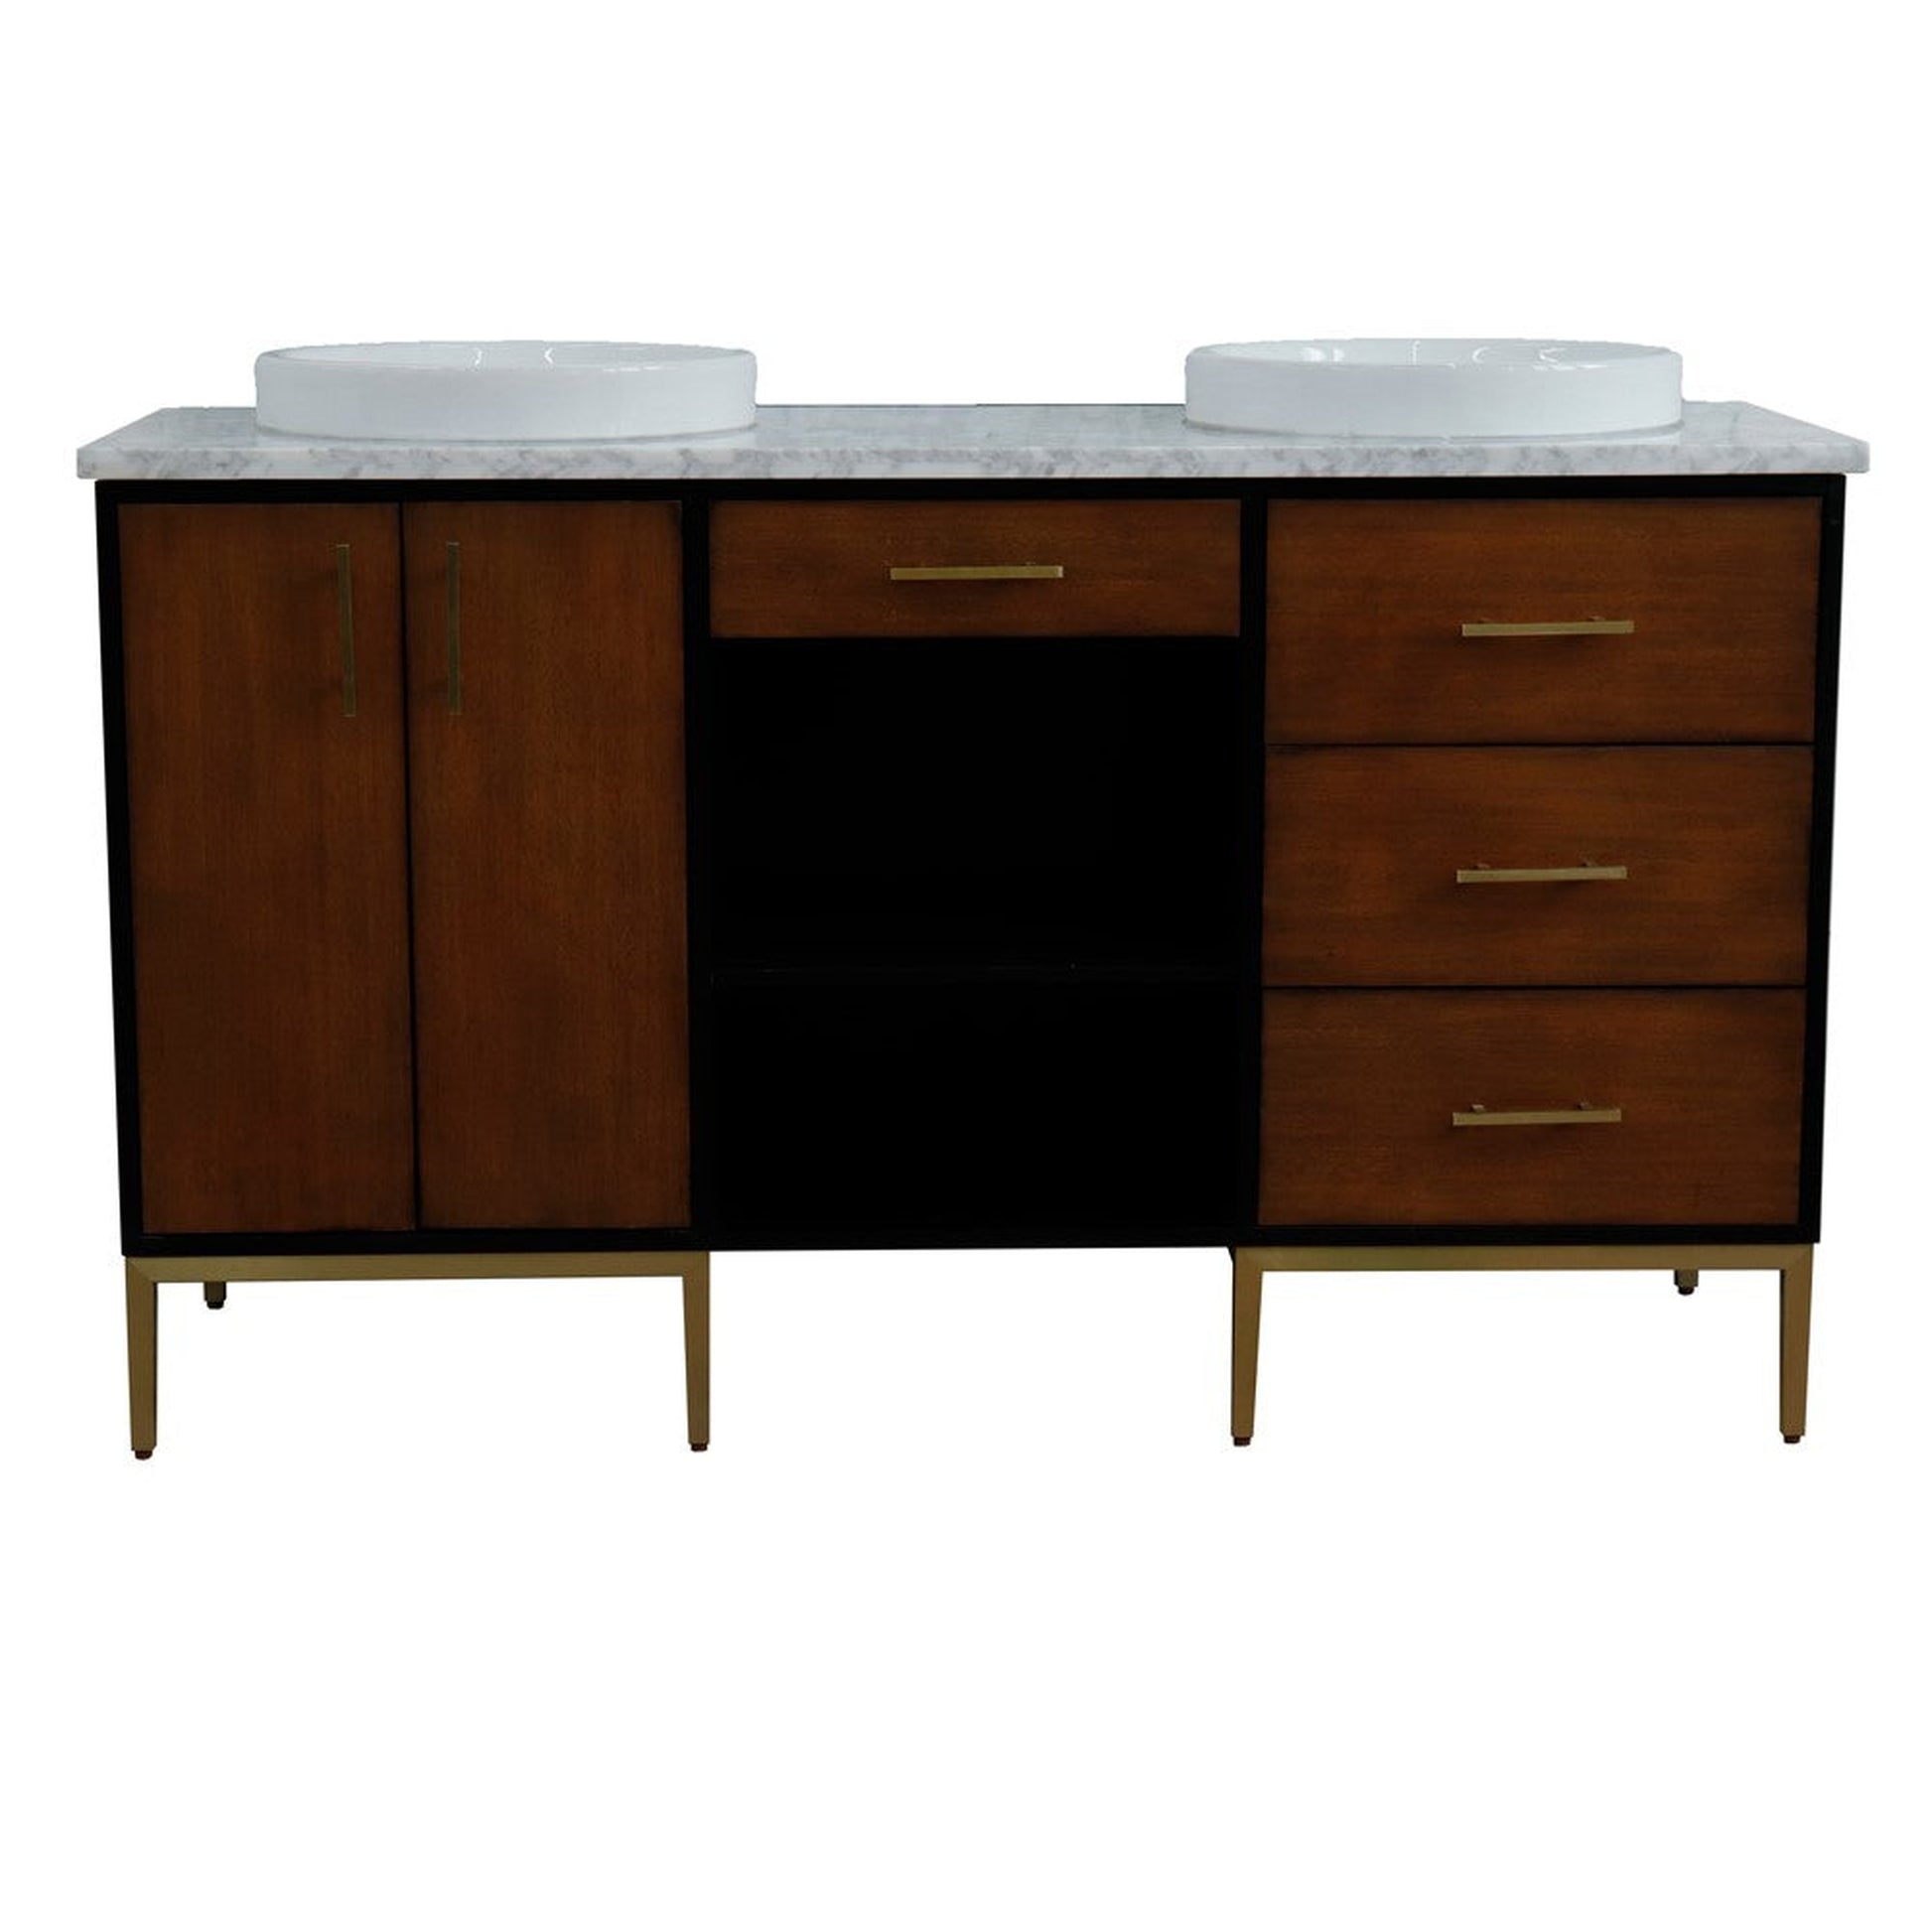 Bellaterra Home Imola 61" 2-Door 4-Drawer 2-Shelf Walnut and Black Freestanding Vanity Set With Ceramic Double Vessel Sink and White Carrara Marble Top